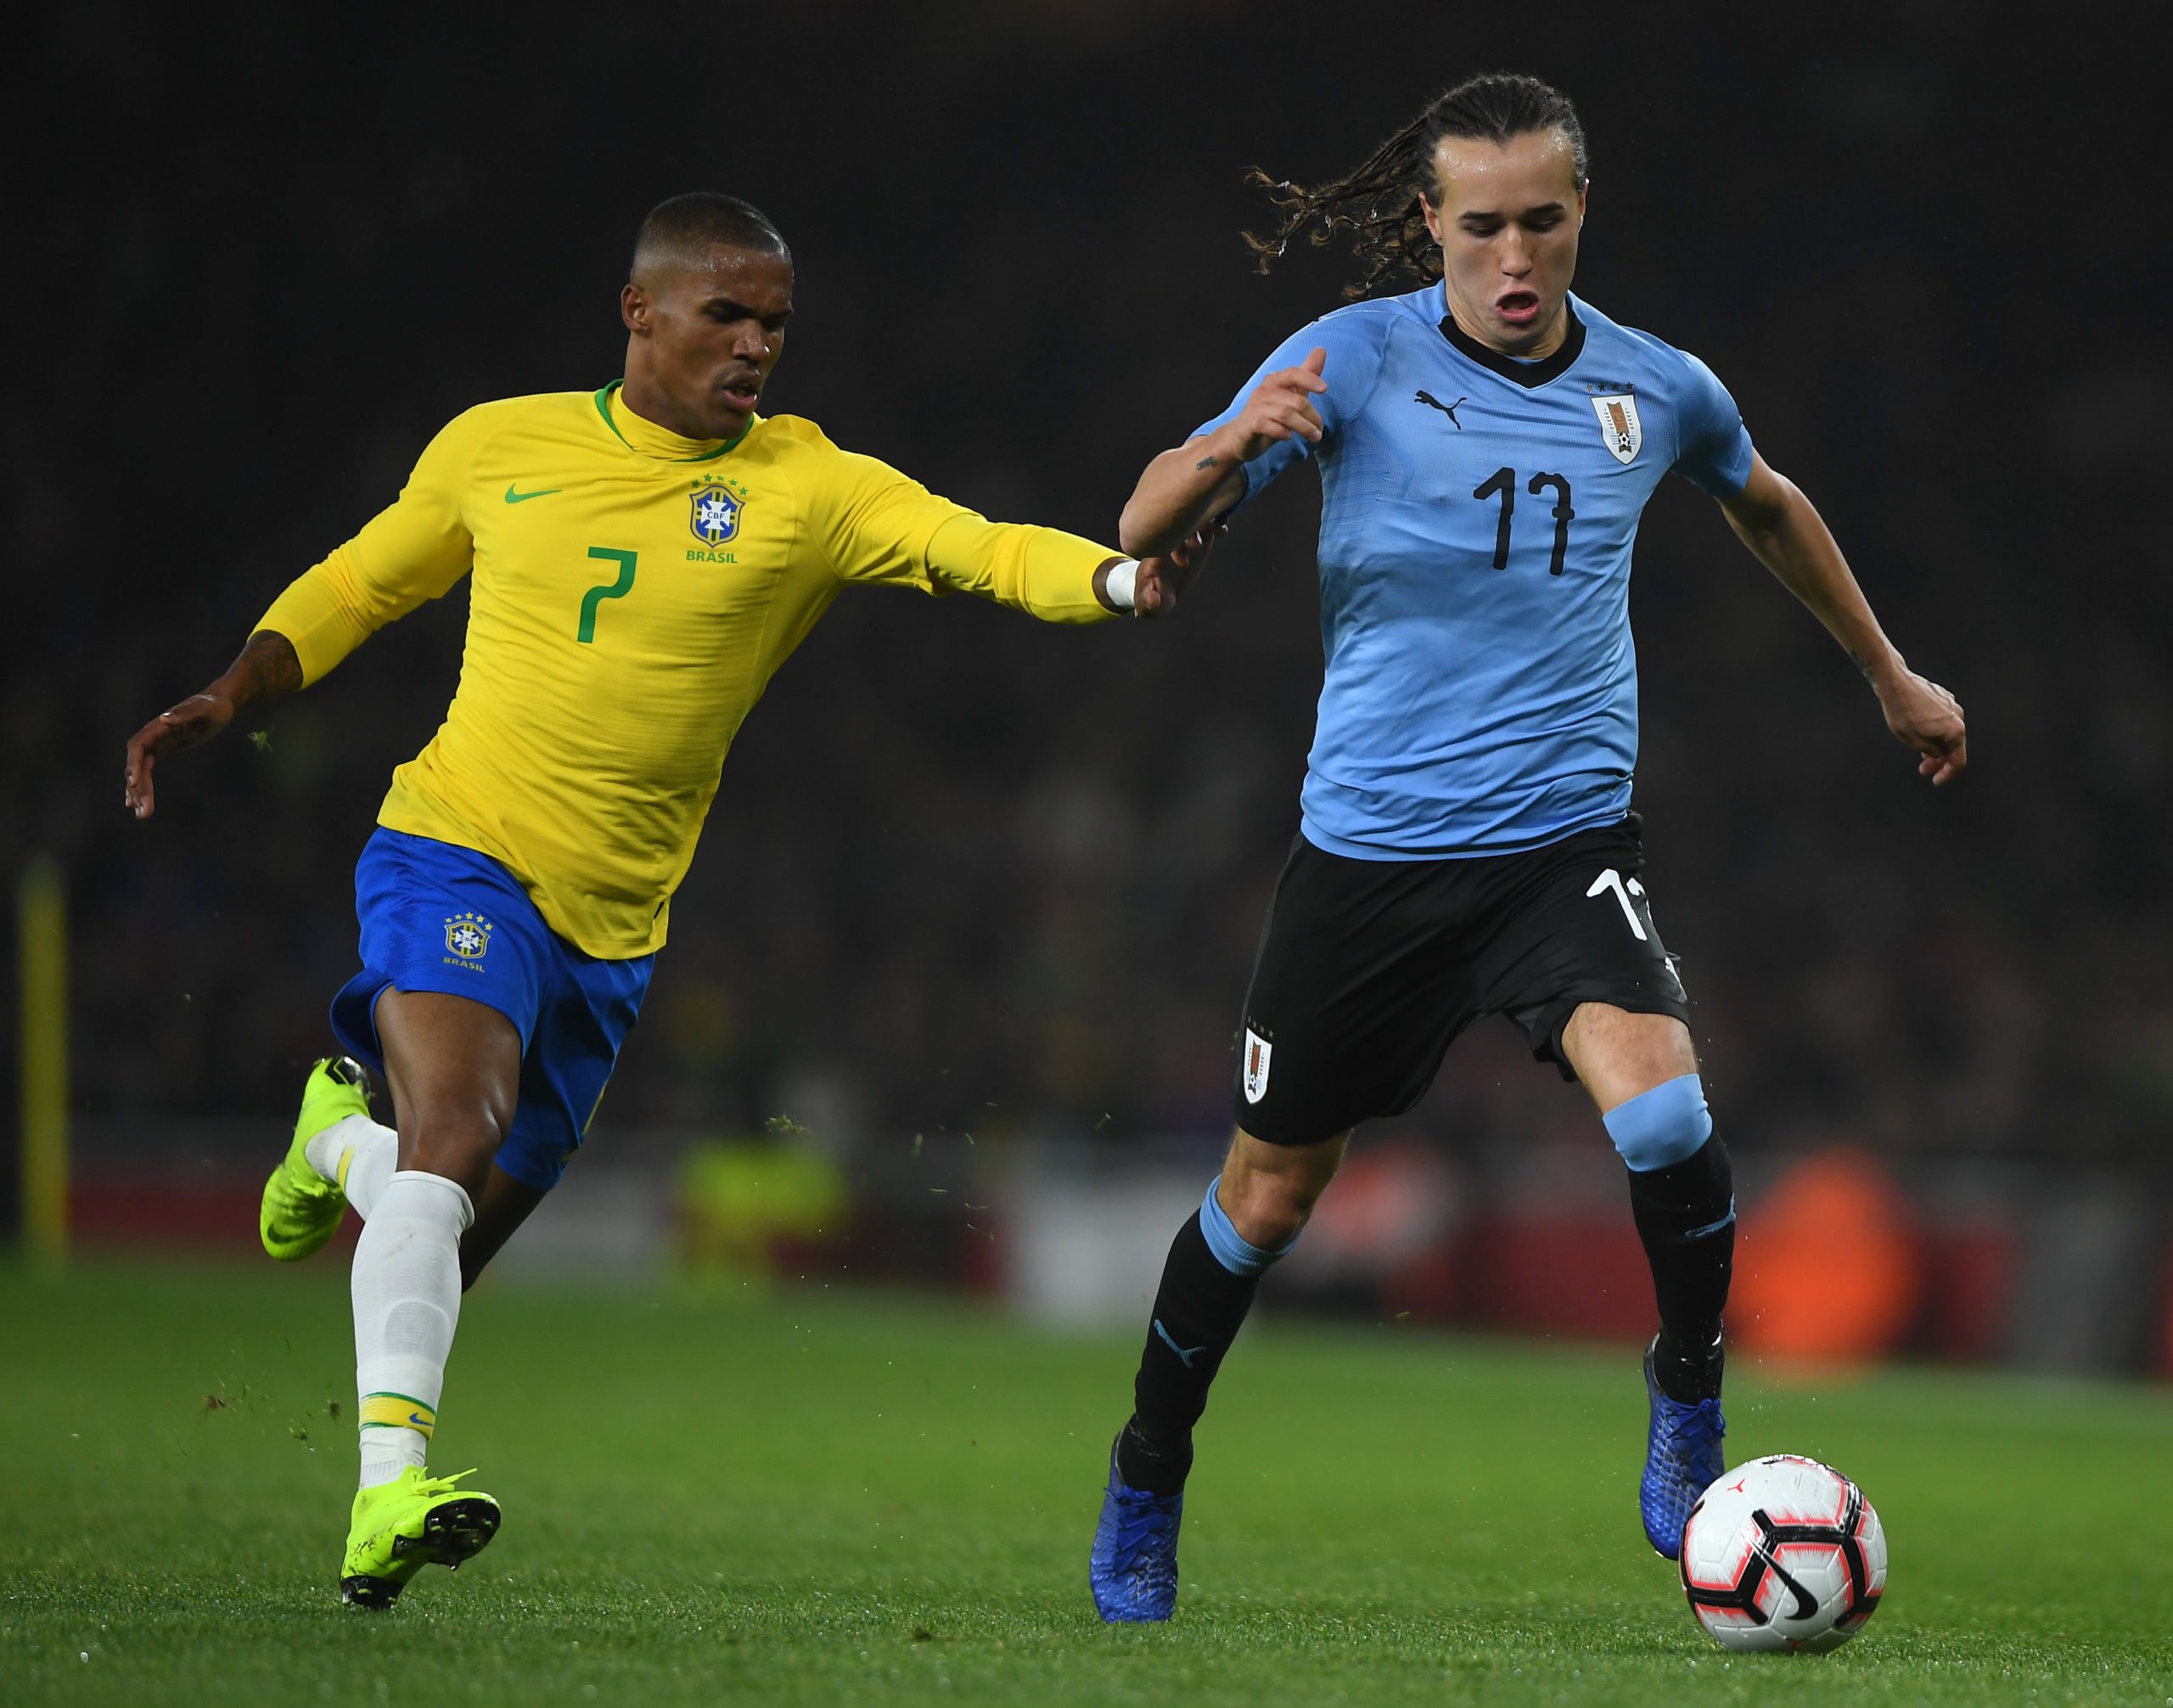 Rangers man can't help but be impressed by Celtic's Diego Laxalt signing